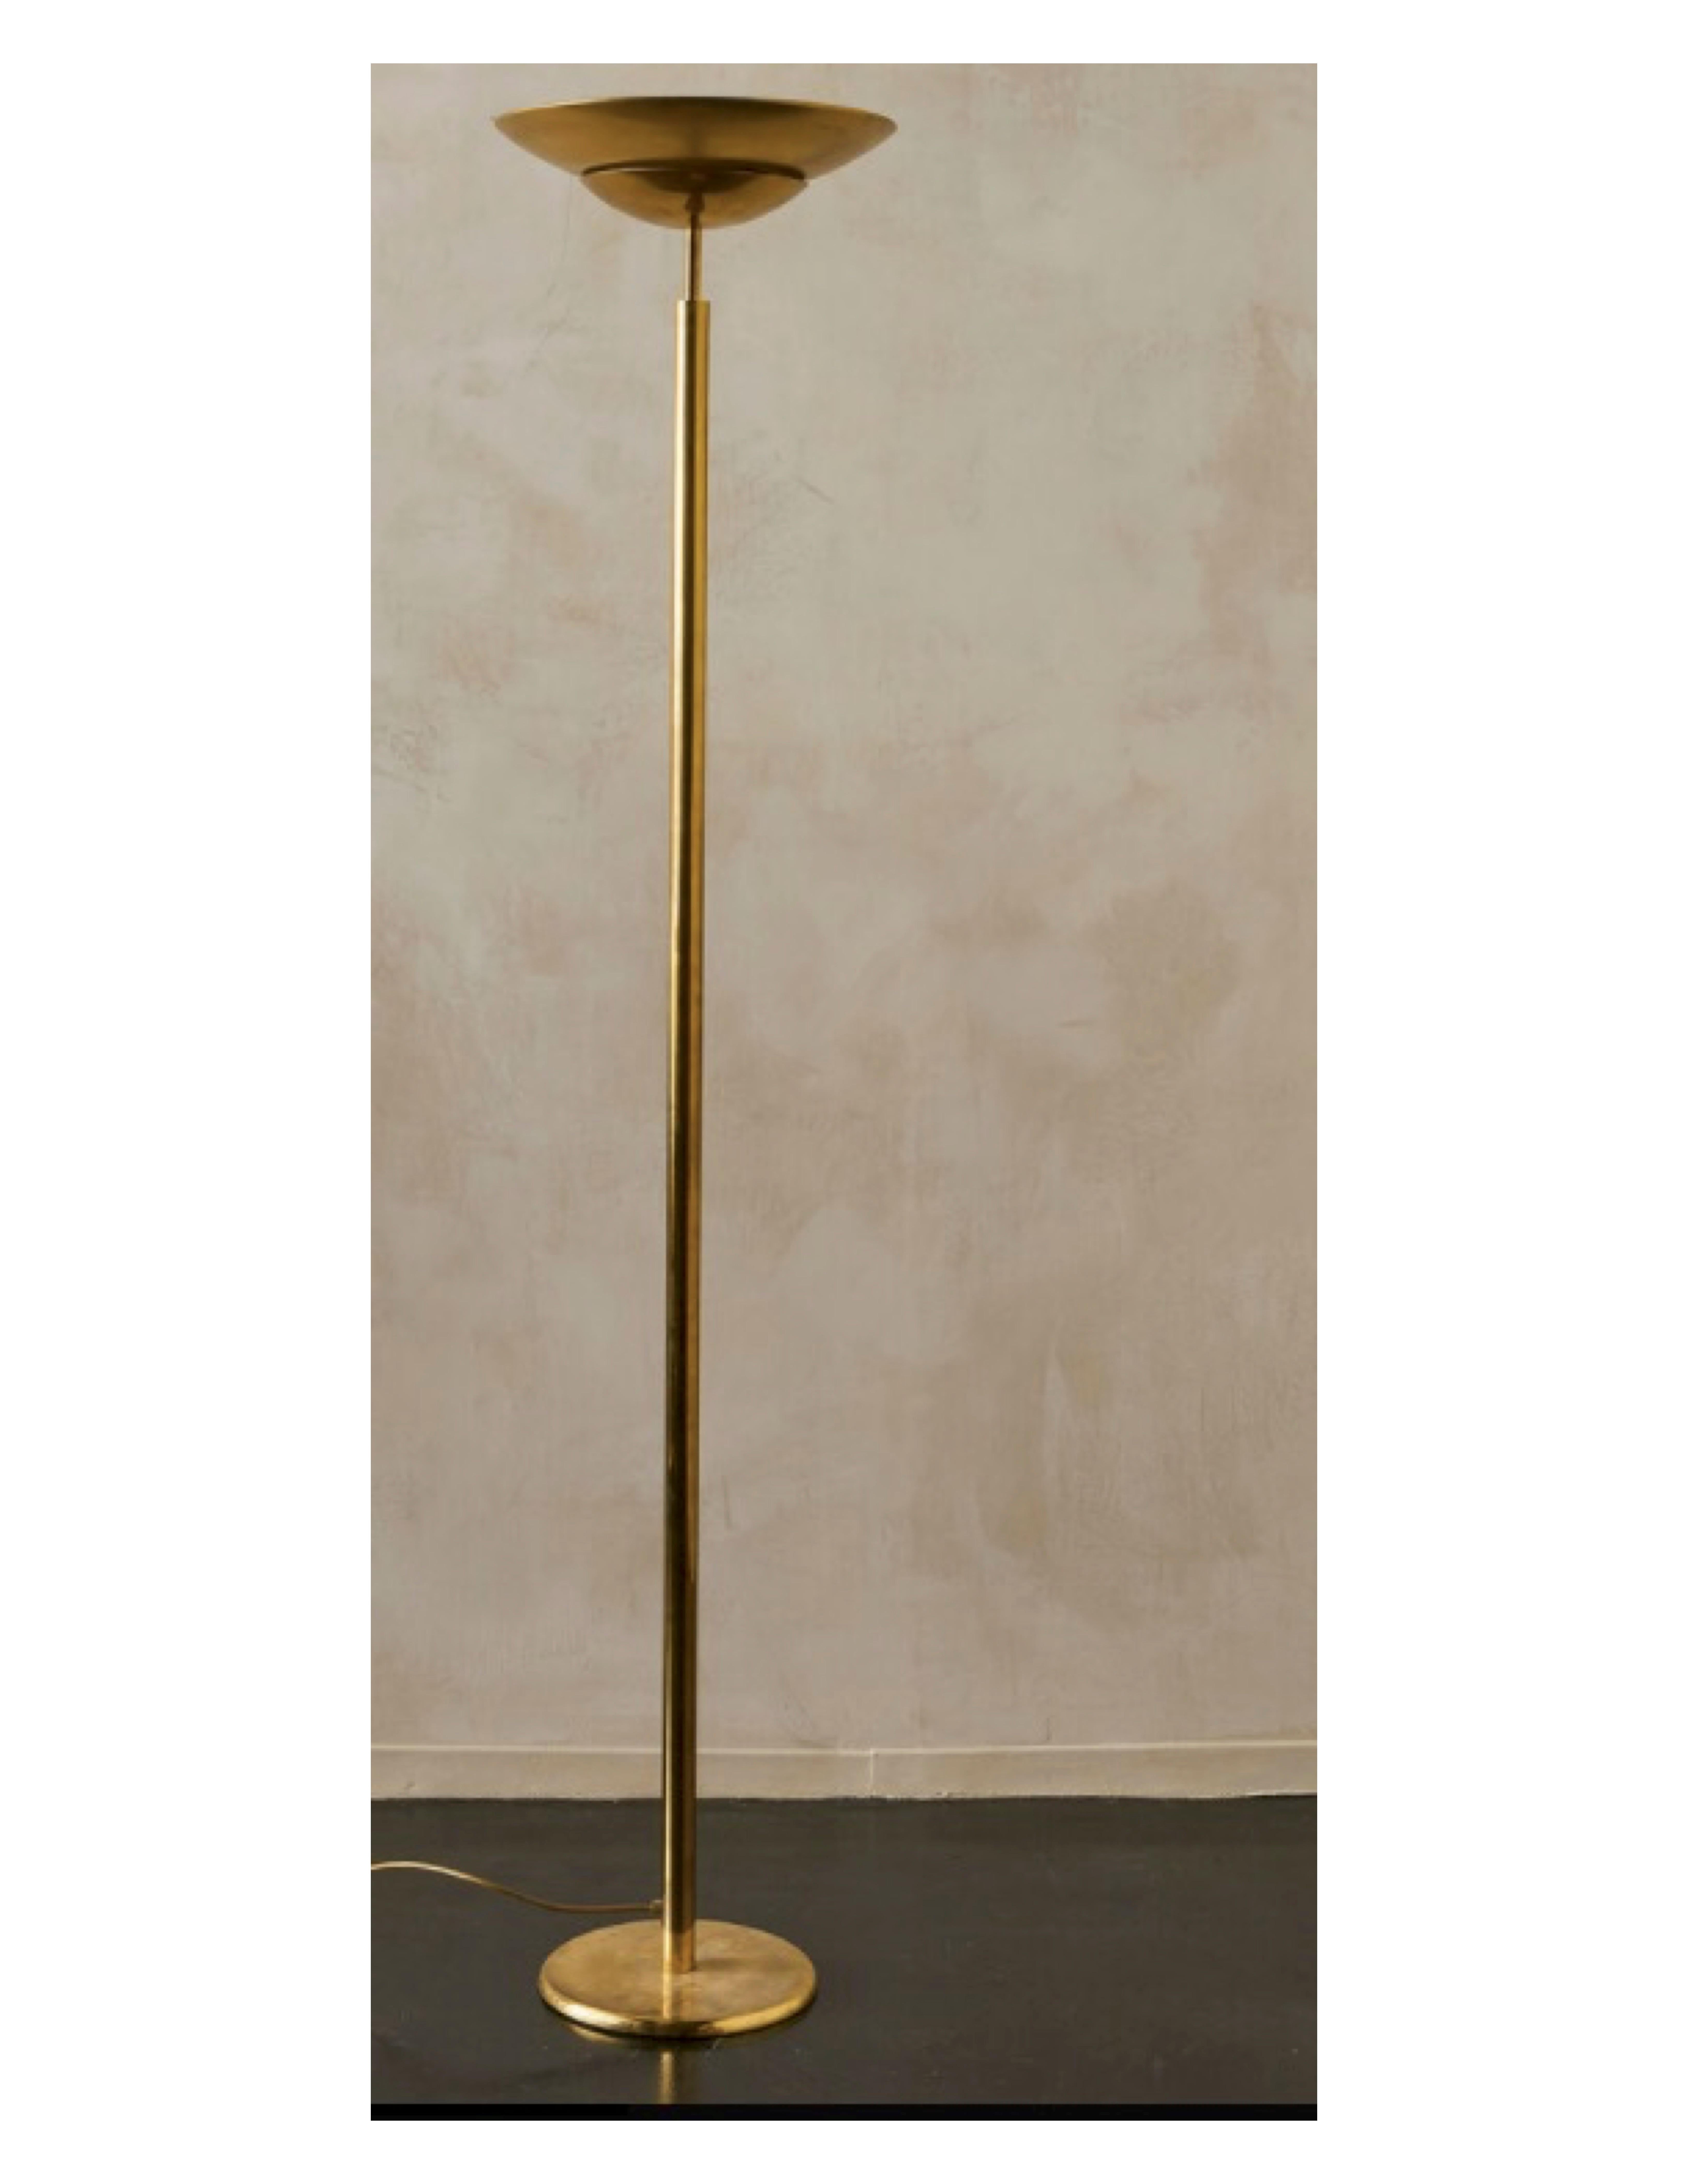 An Art Deco torchère style brass floor lamp sourced in Italy.